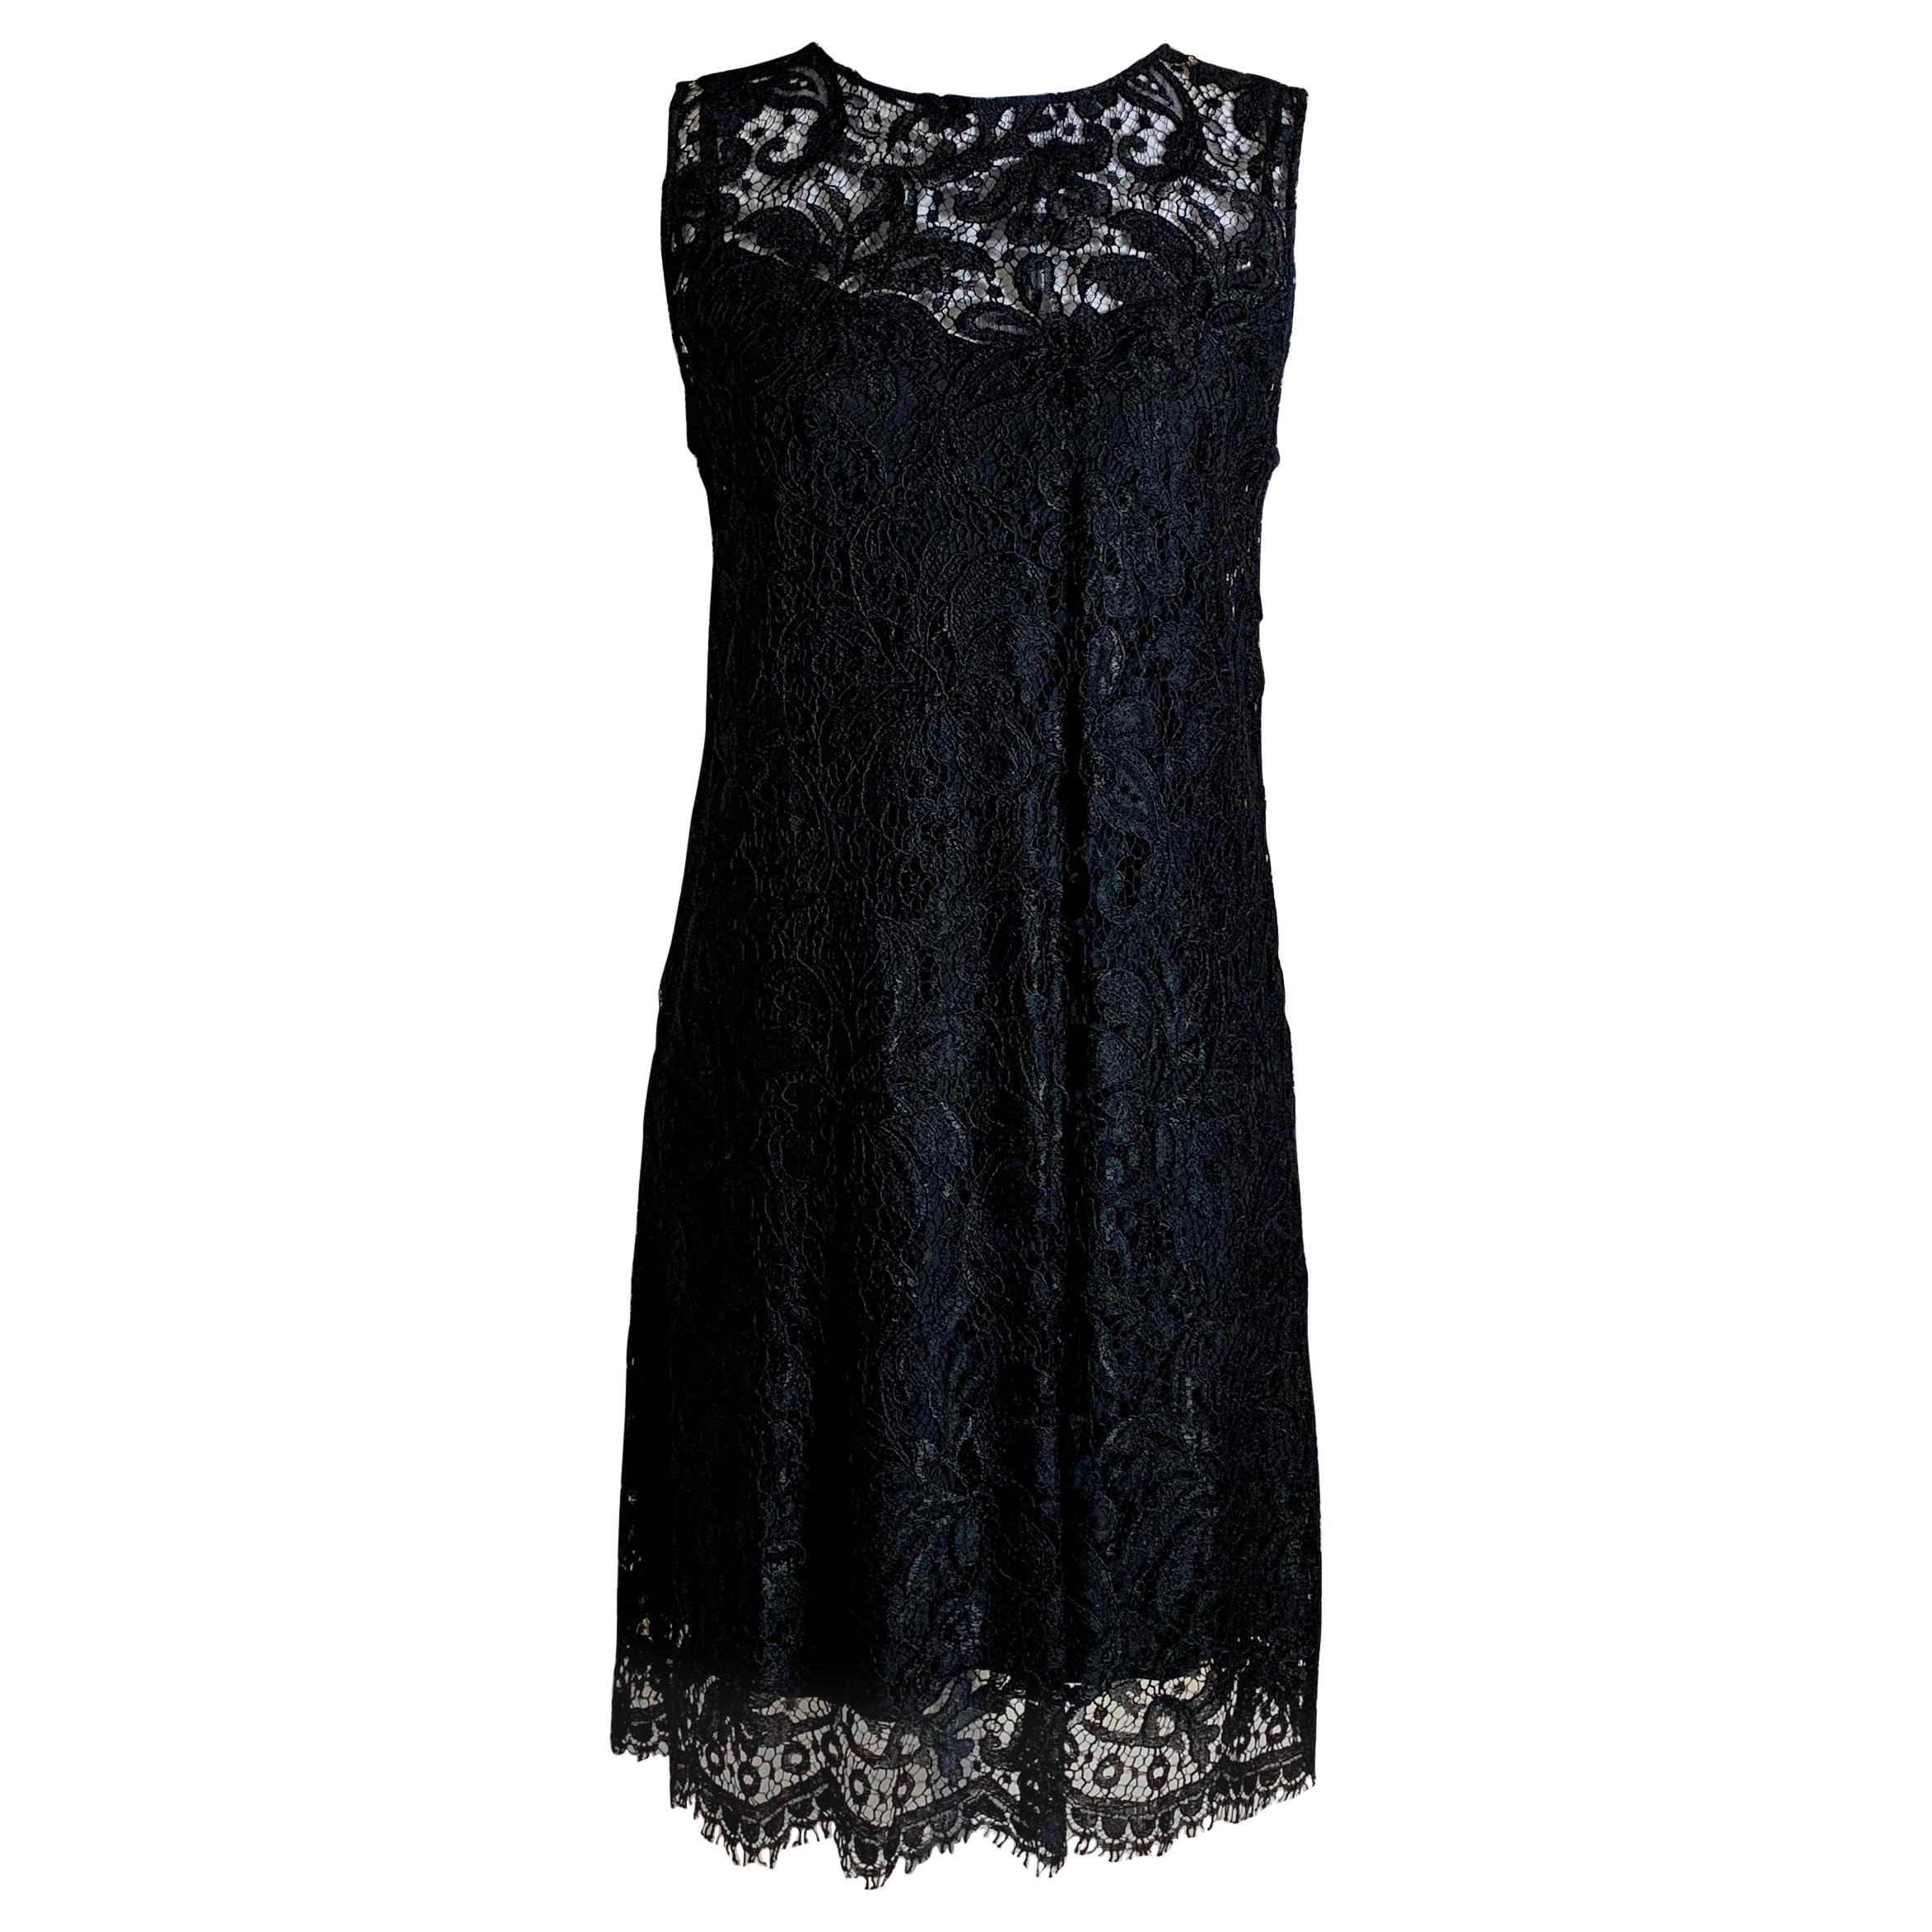 Dolce & Gabbana Black Cotton Lace, Silk Lined Sleeveless Dress with Tags, Italy